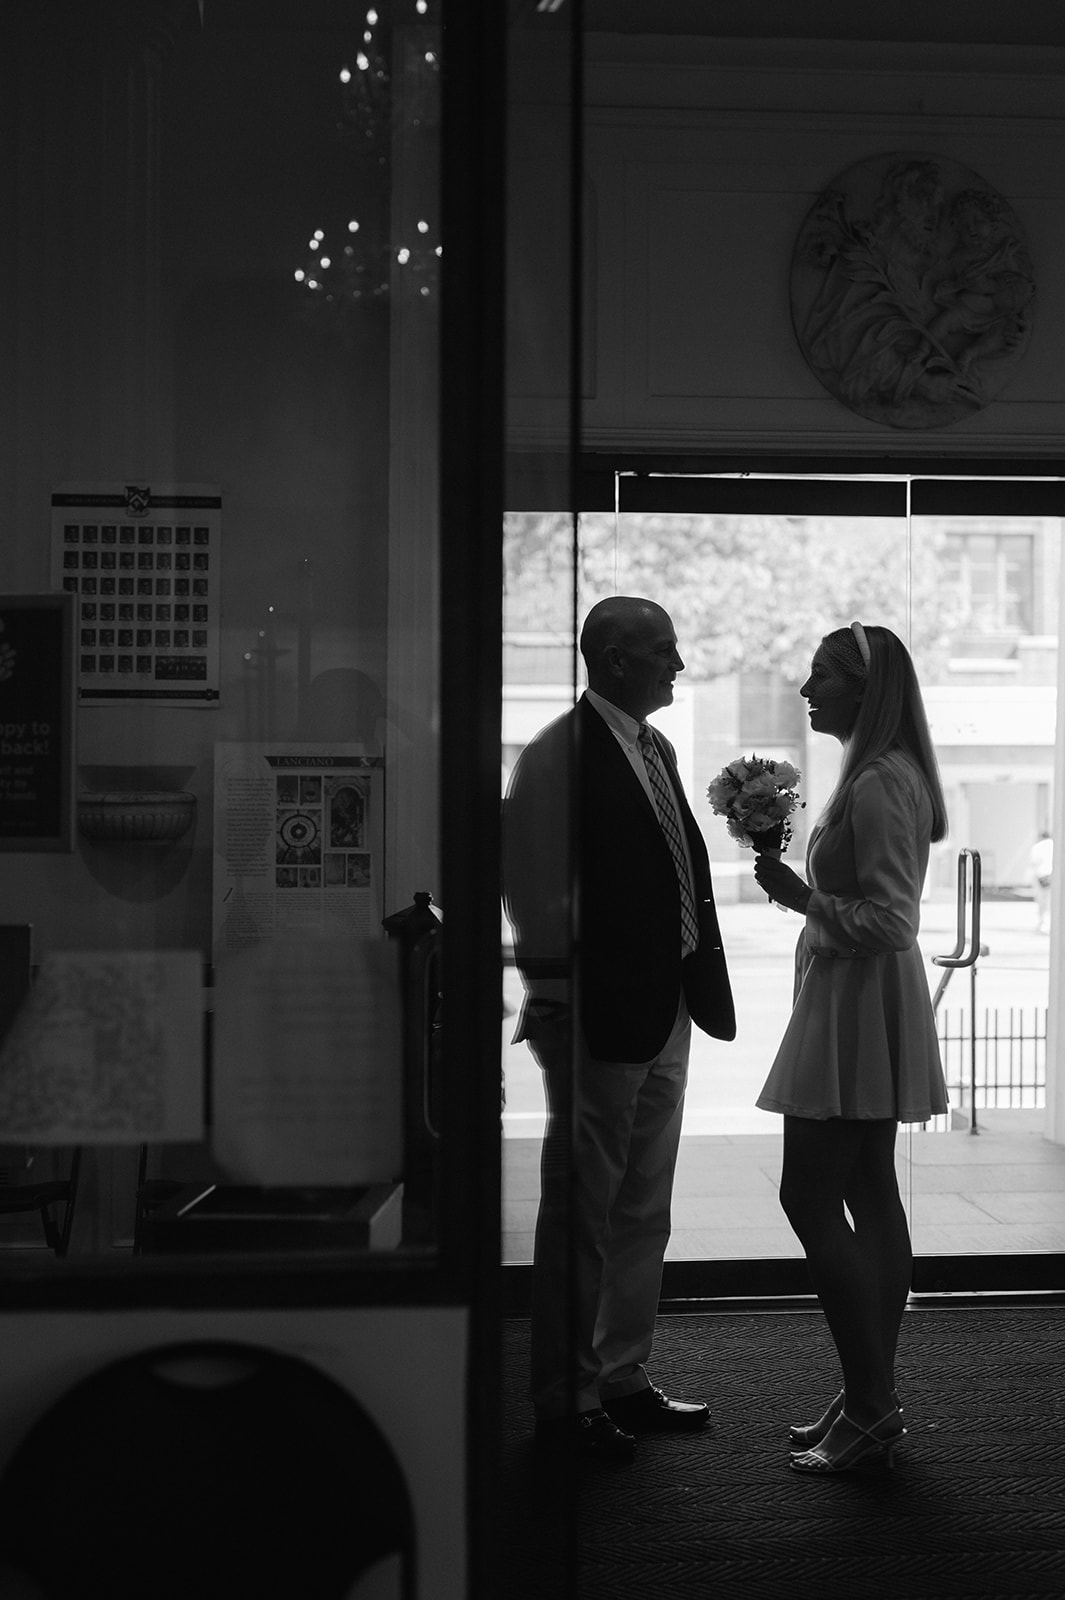 Emotional moment before the ceremony at St. Joseph's Church, Greenwich Village. A candid black and white capture of a bride and her dad in heartfelt conversation